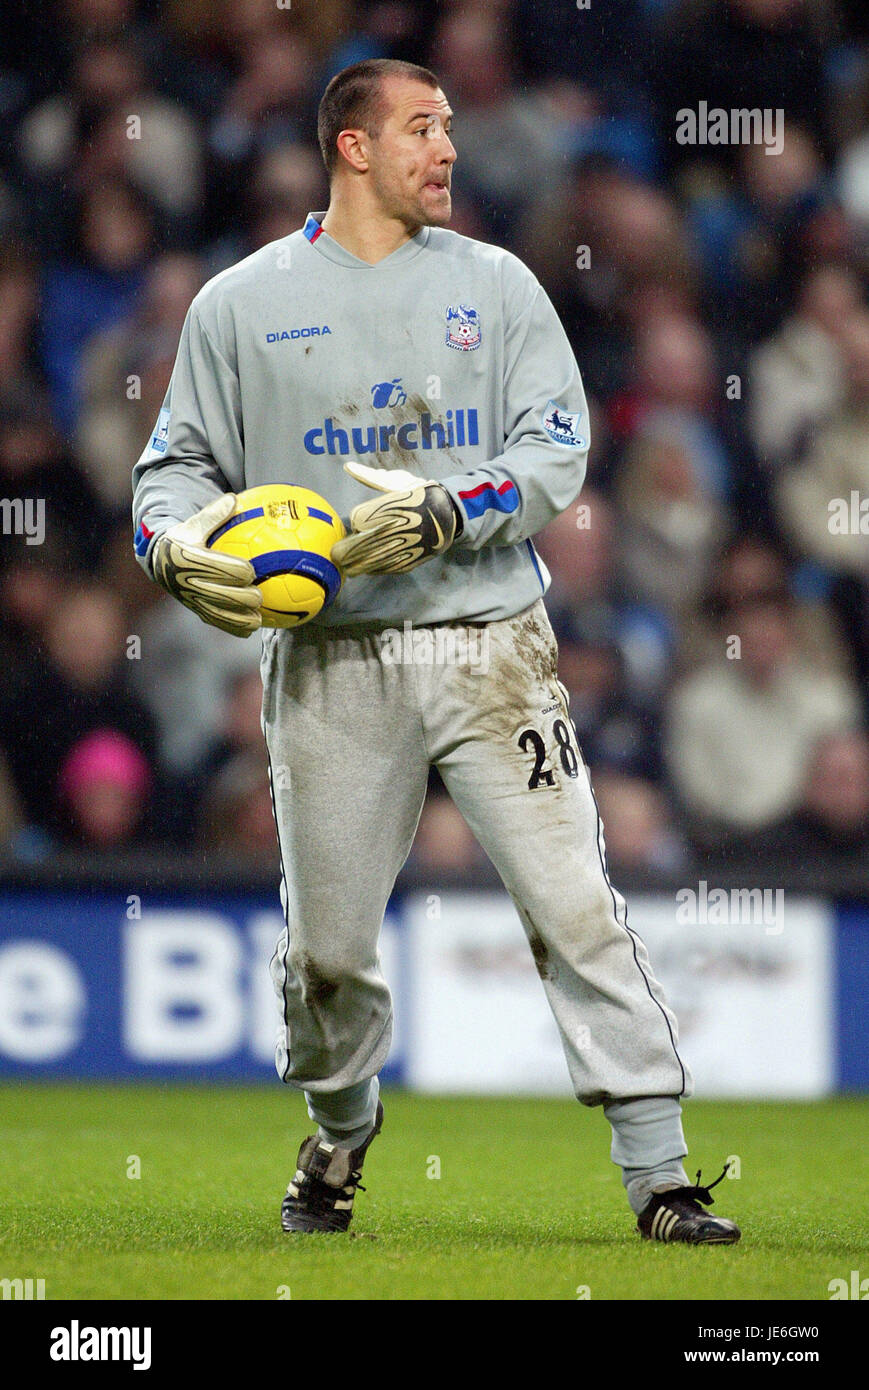 gabor-kiraly-crystal-palace-fc-city-of-manchester-stadium-manchester-JE6GW0.jpg